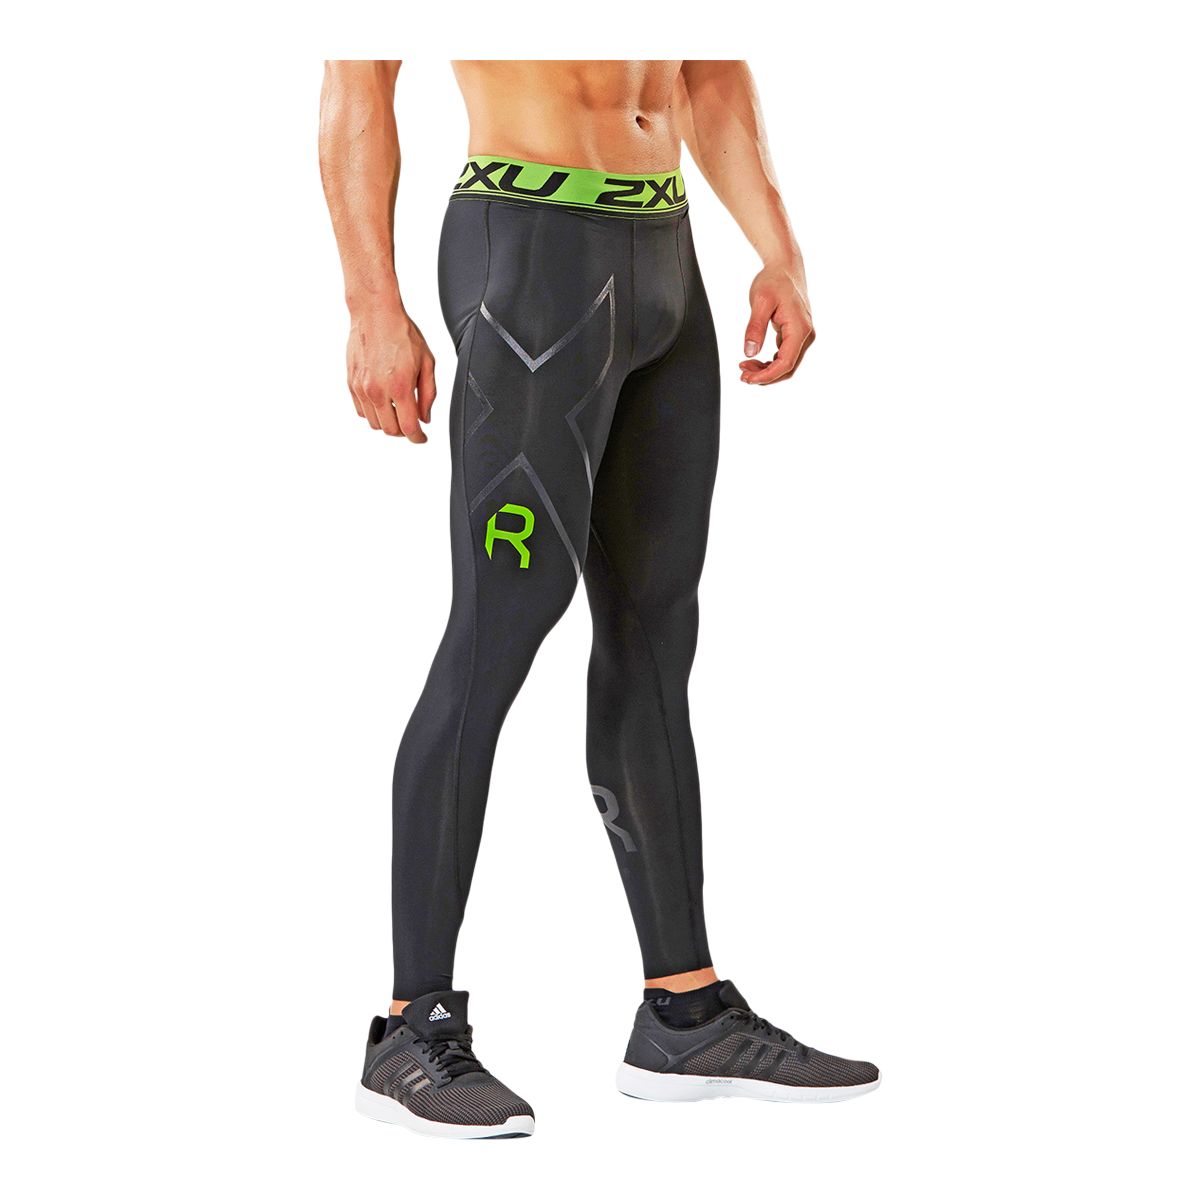 Neleus Men's 2 Pack Compression Pants Workout Running Tights